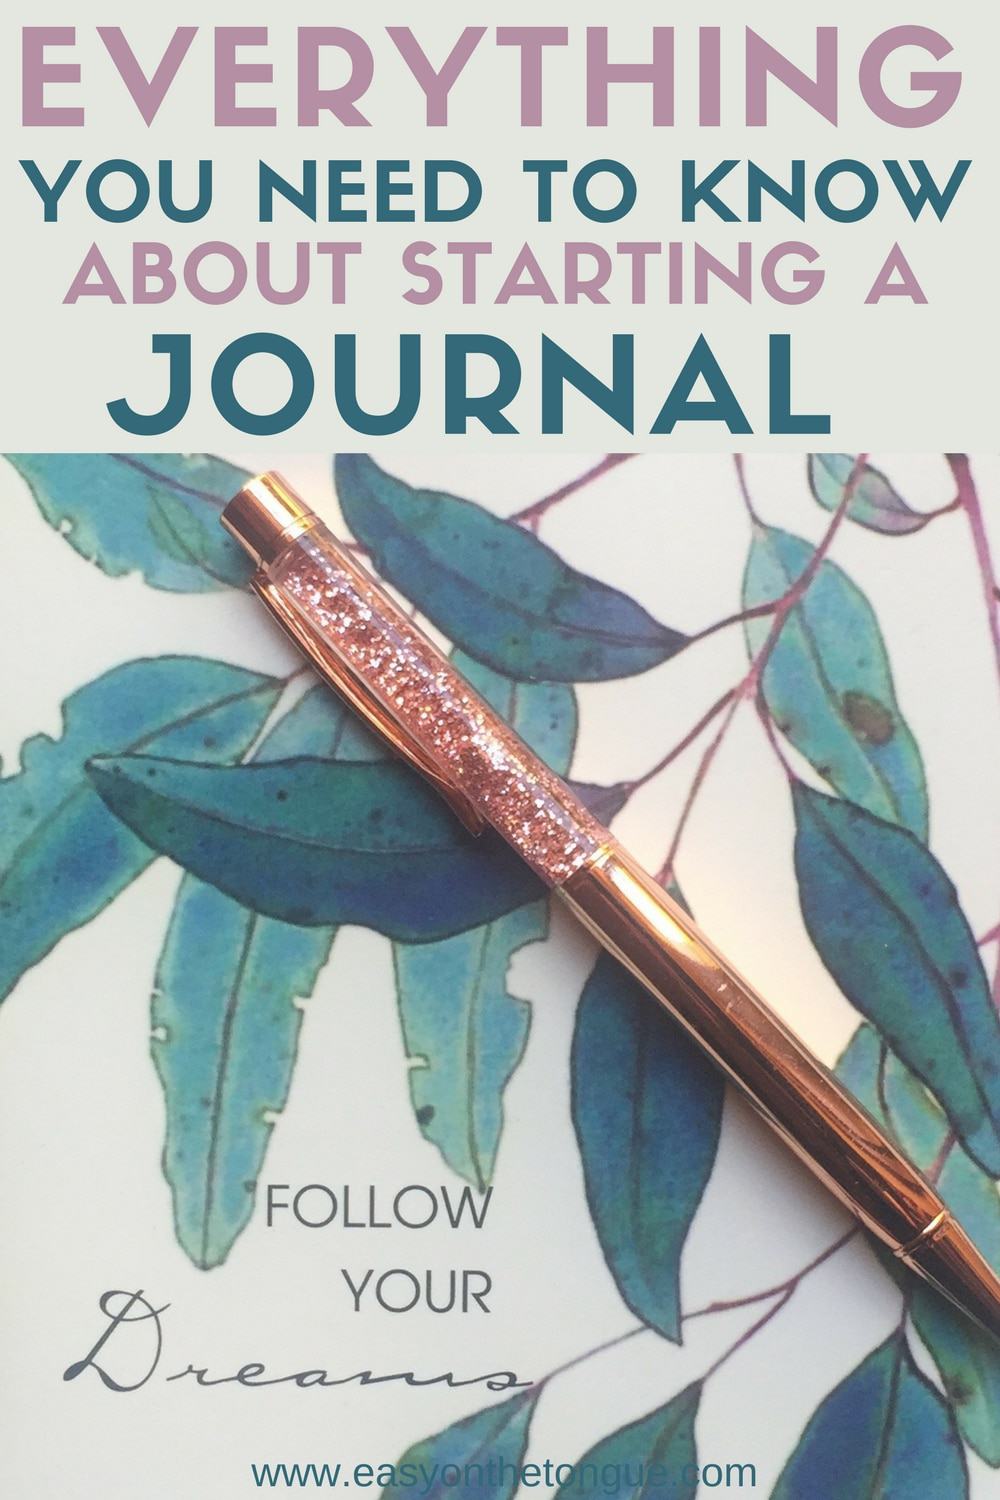 Journaling Get started with enough Ideas and Resources to make it a daily organised habit. Get all the detail on www.easyonthetongue.com journal journaling 2 Journaling – How to Start and Choosing One to Inspire you